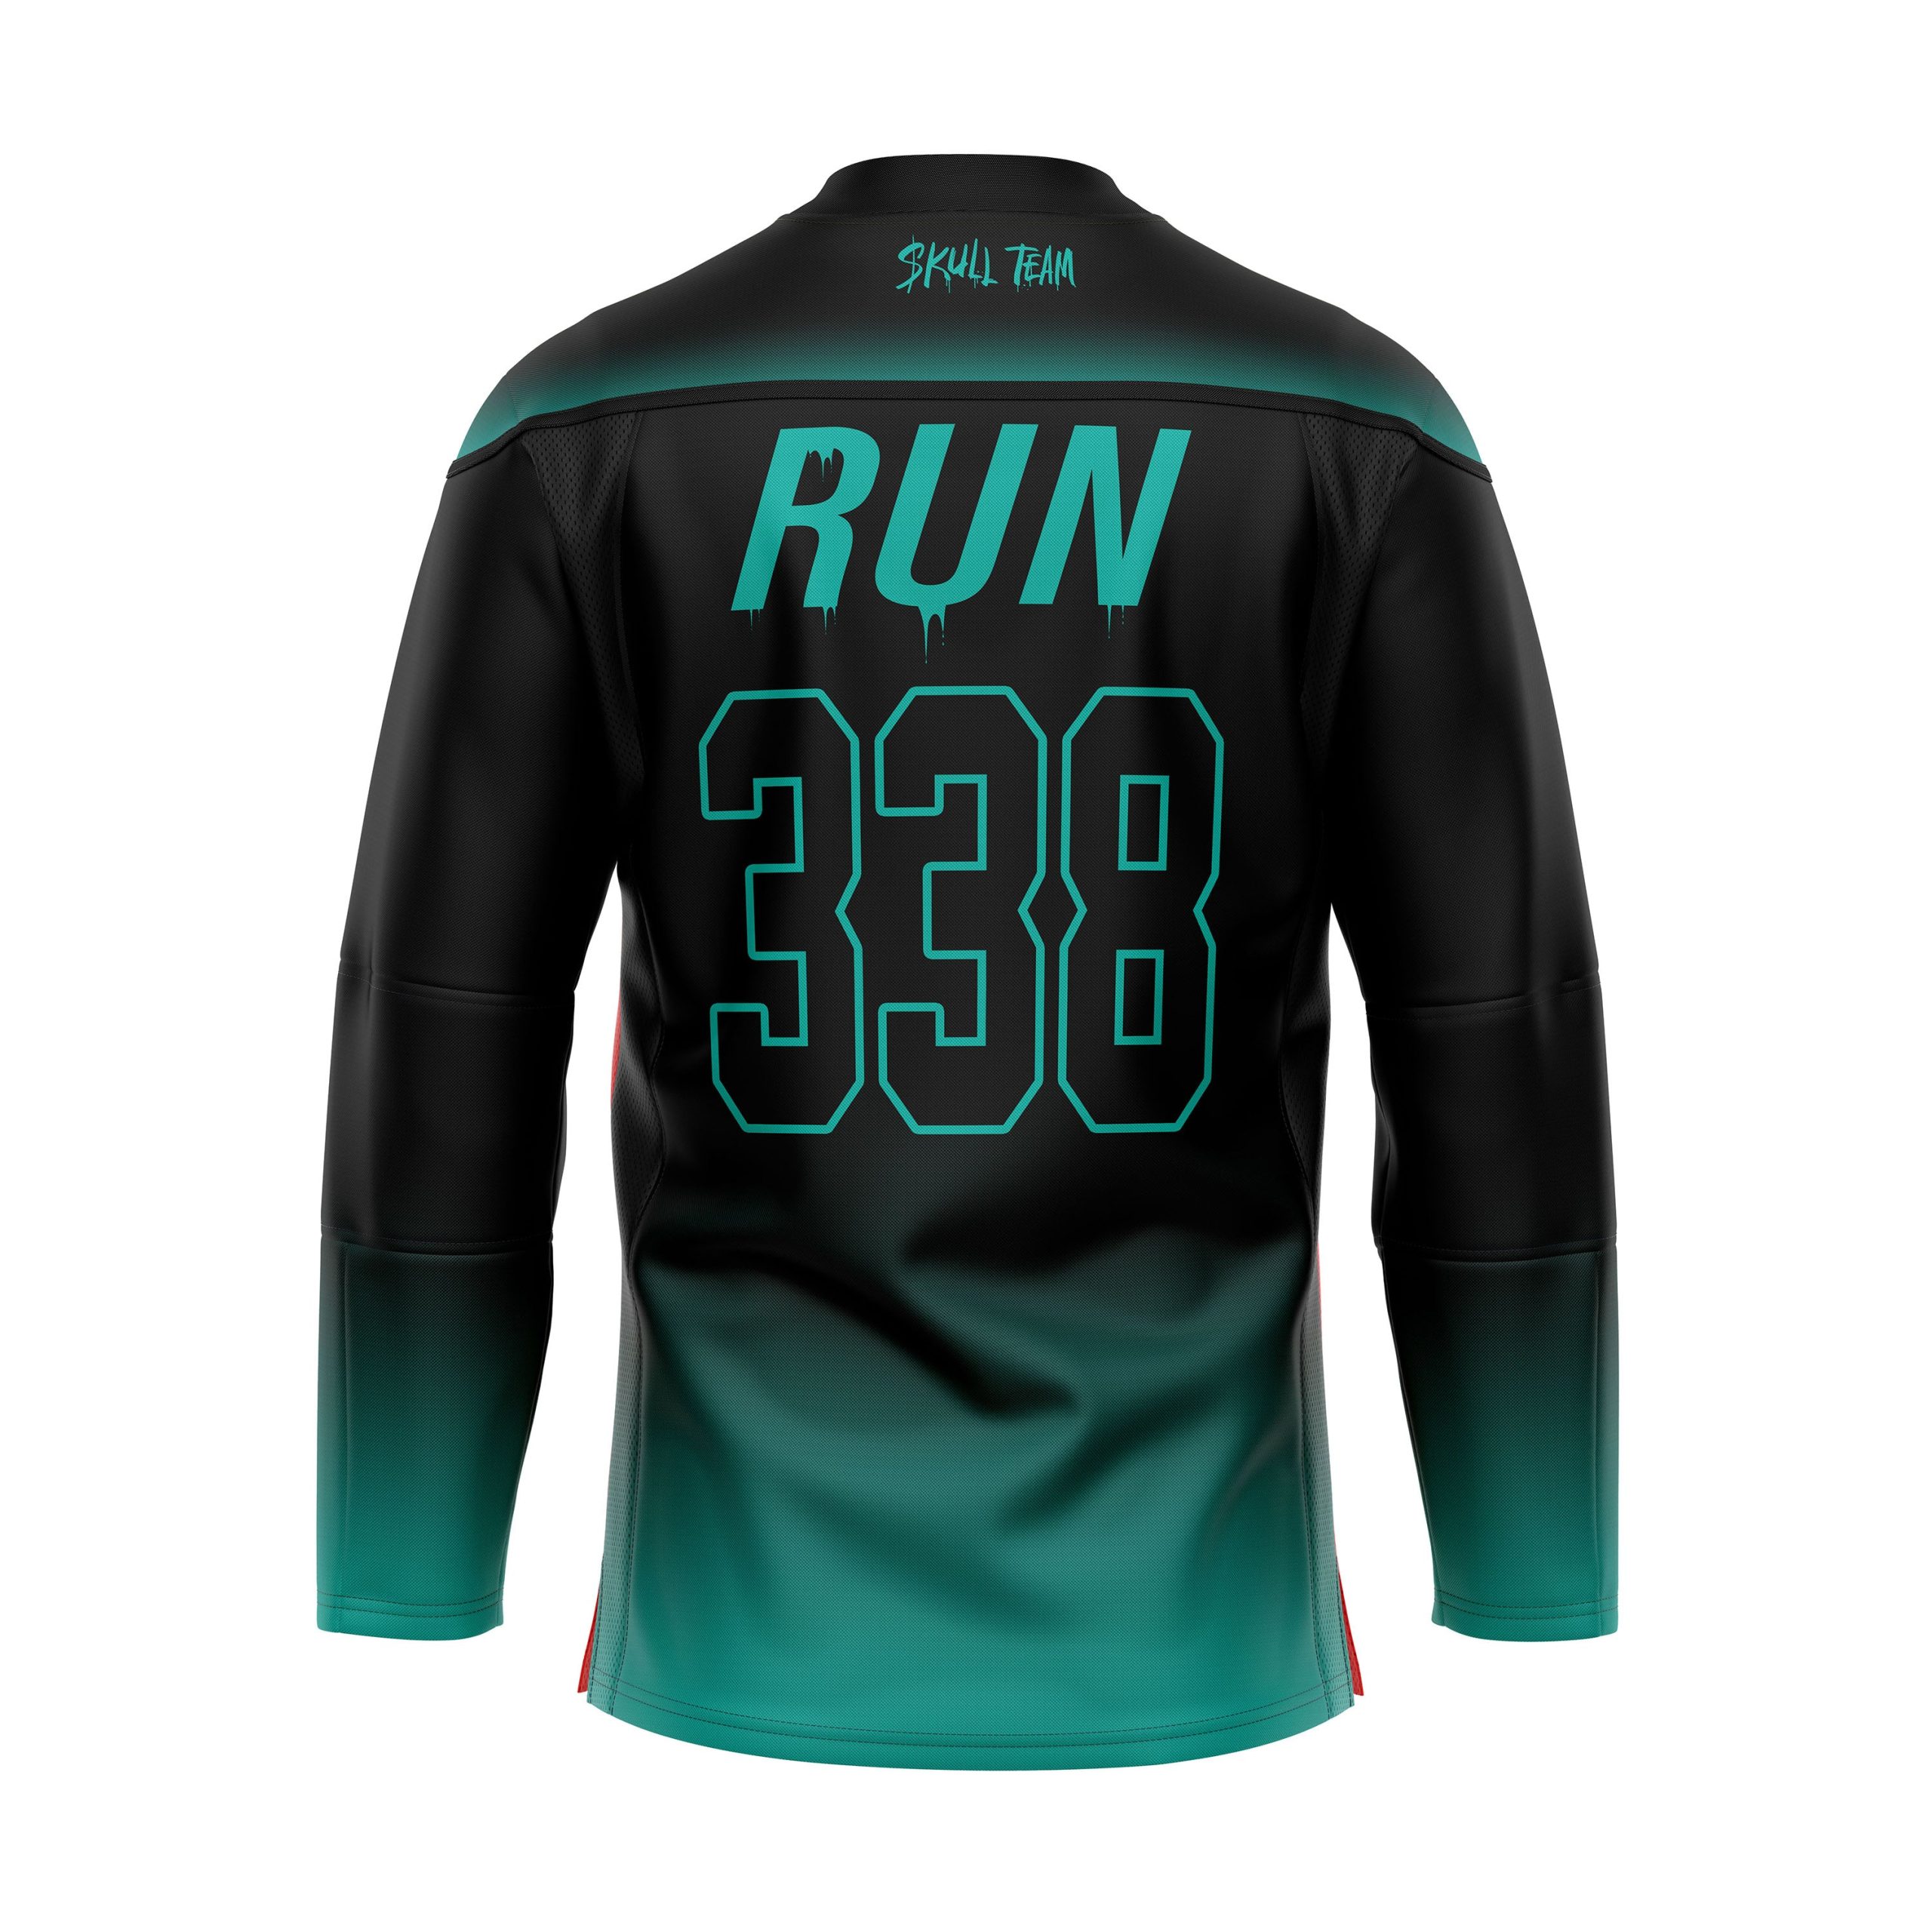 A Kai hockey jersey with the words run 338 on it.